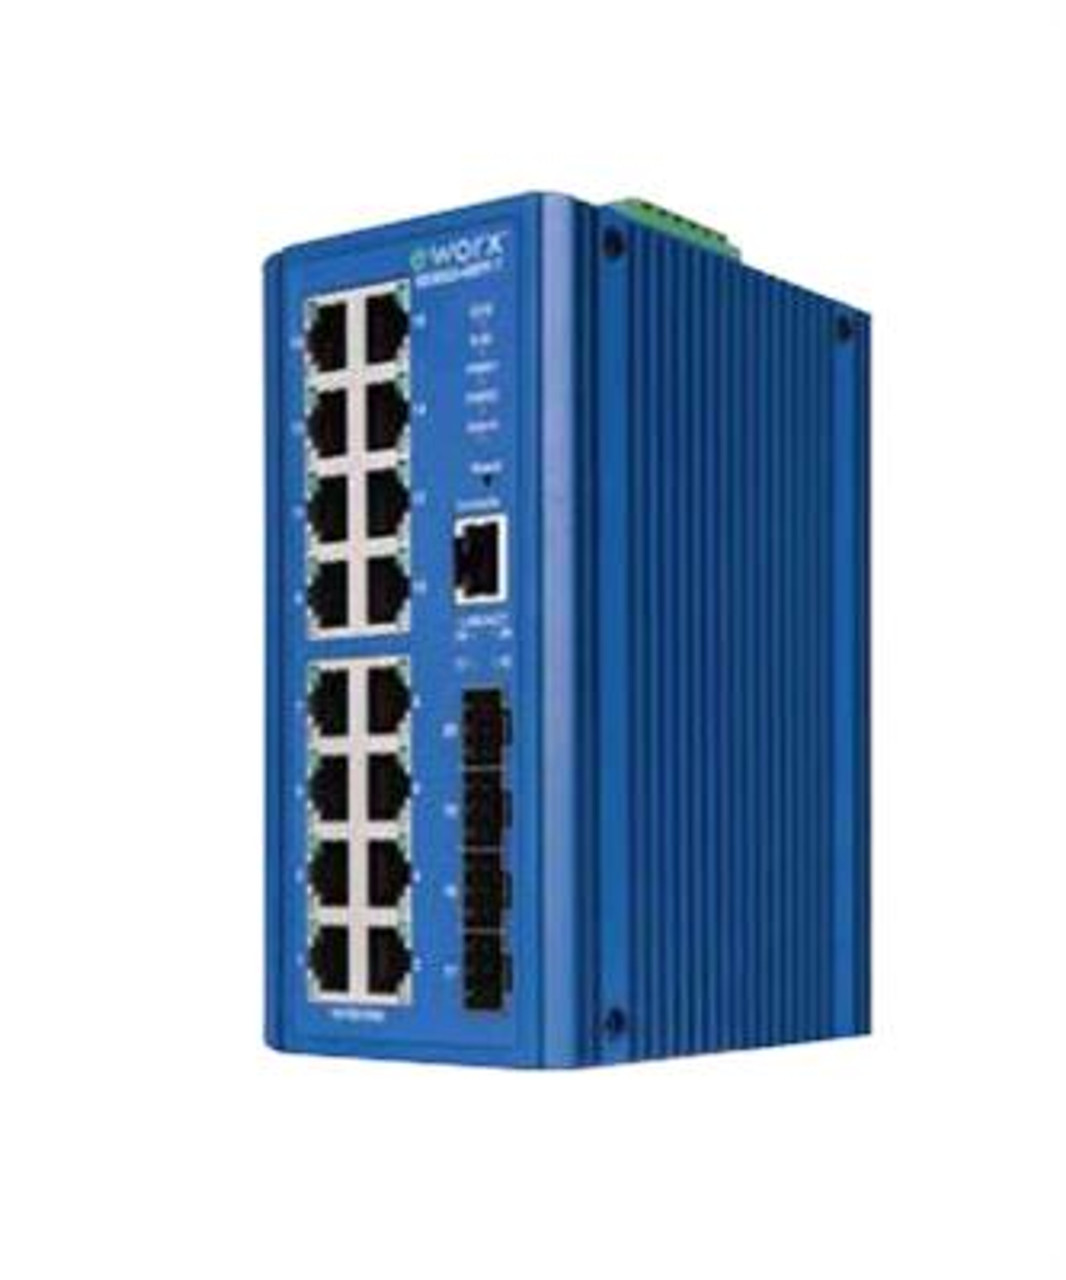 SE508-4SFP-T B+B SmartWorx eWorx SE508-4SFP-T Ethernet Switch - 4 Ports - Manageable - Fast Ethernet - 1000Base-X - 2 Layer Supported - Modular - 4 SFP Slots -